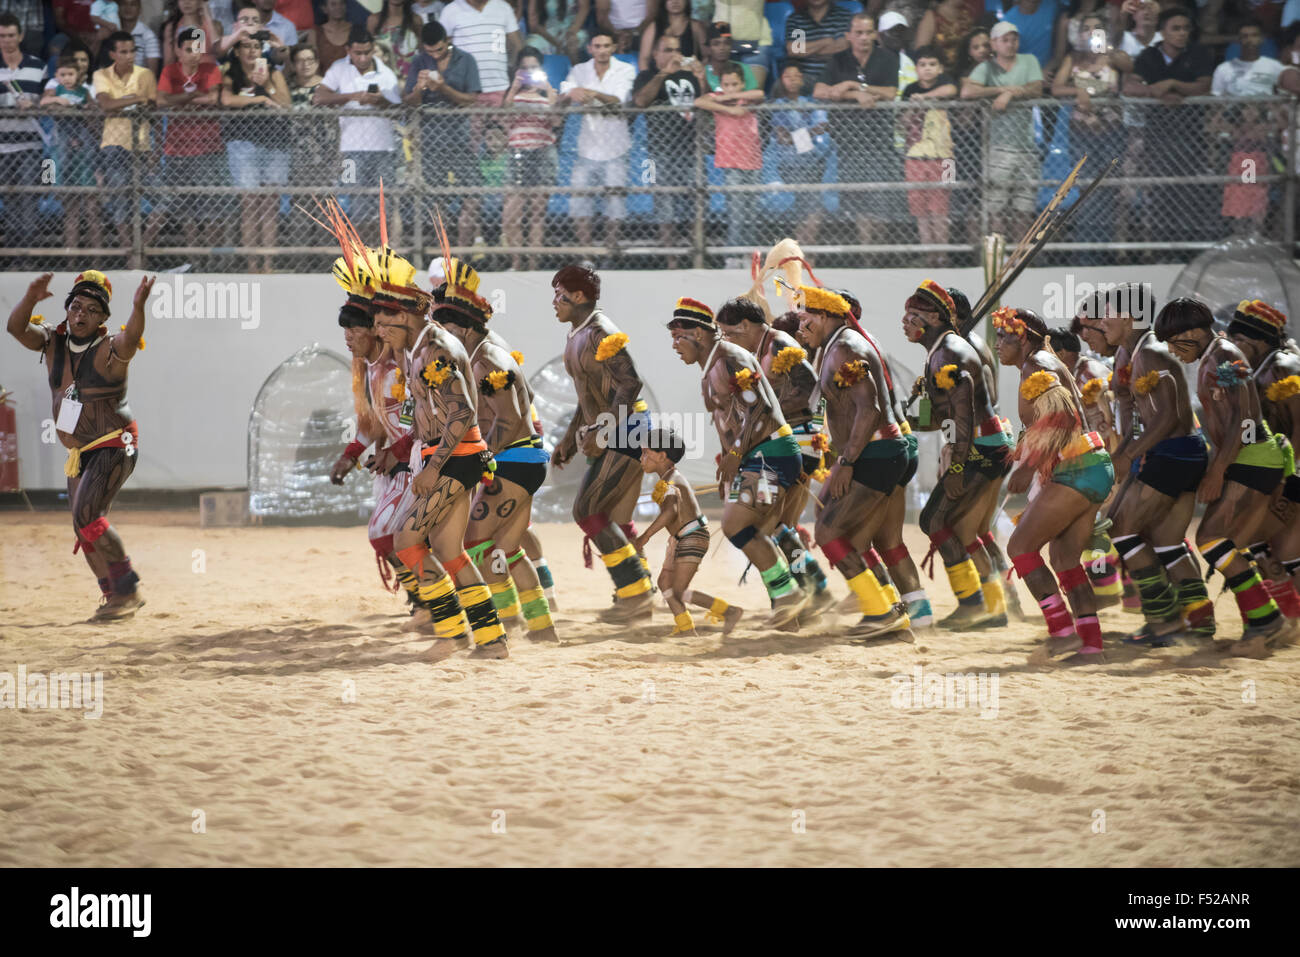 Palmas, Tocantins State, Brazil. 25th October, 2015. Kuikuro warriors perform a traditional celebration, 'danca dos macacos', to greet the public at the International Indigenous Games, in the city of Palmas, Tocantins State, Brazil. Credit:  Sue Cunningham Photographic/Alamy Live News Stock Photo